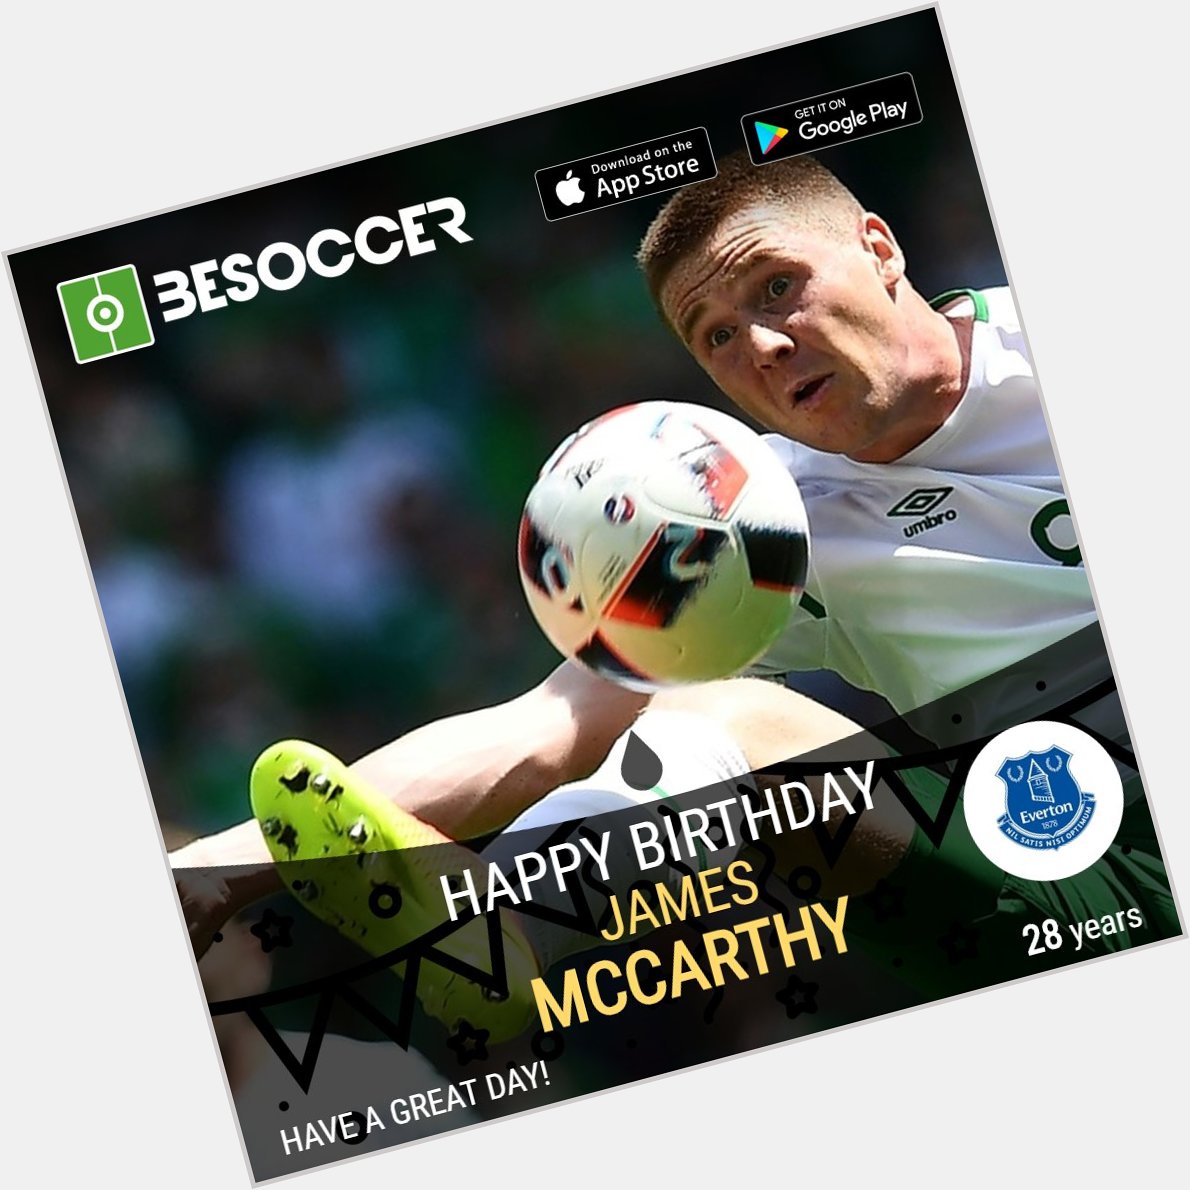 Happy birthday to and midfielder James McCarthy! 